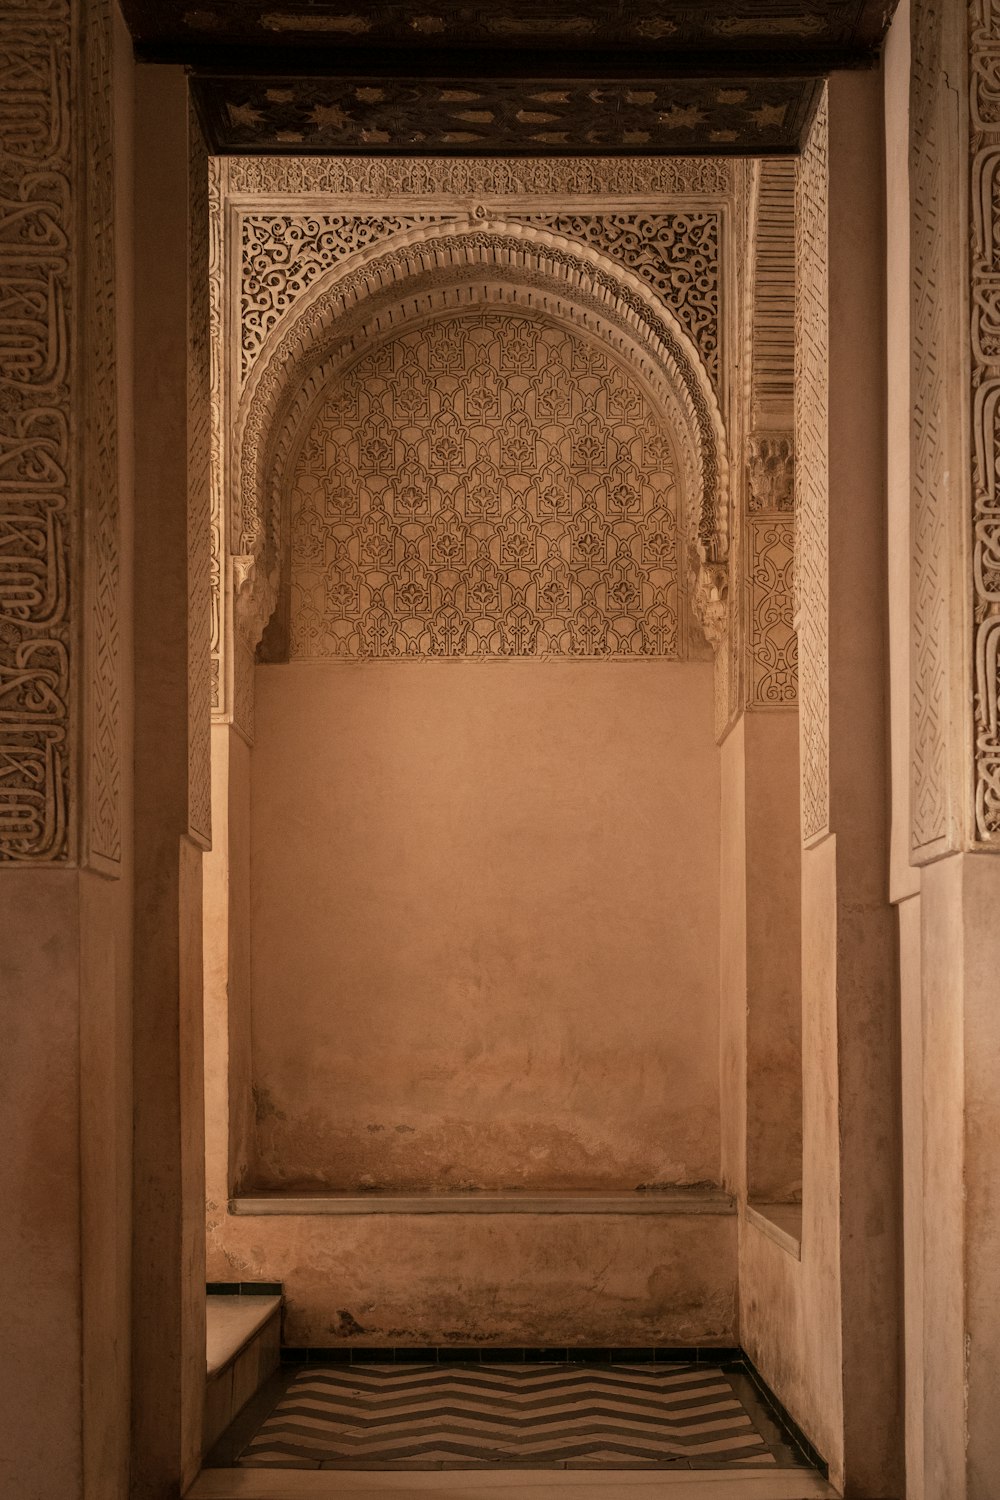 an archway in a building with a tiled floor